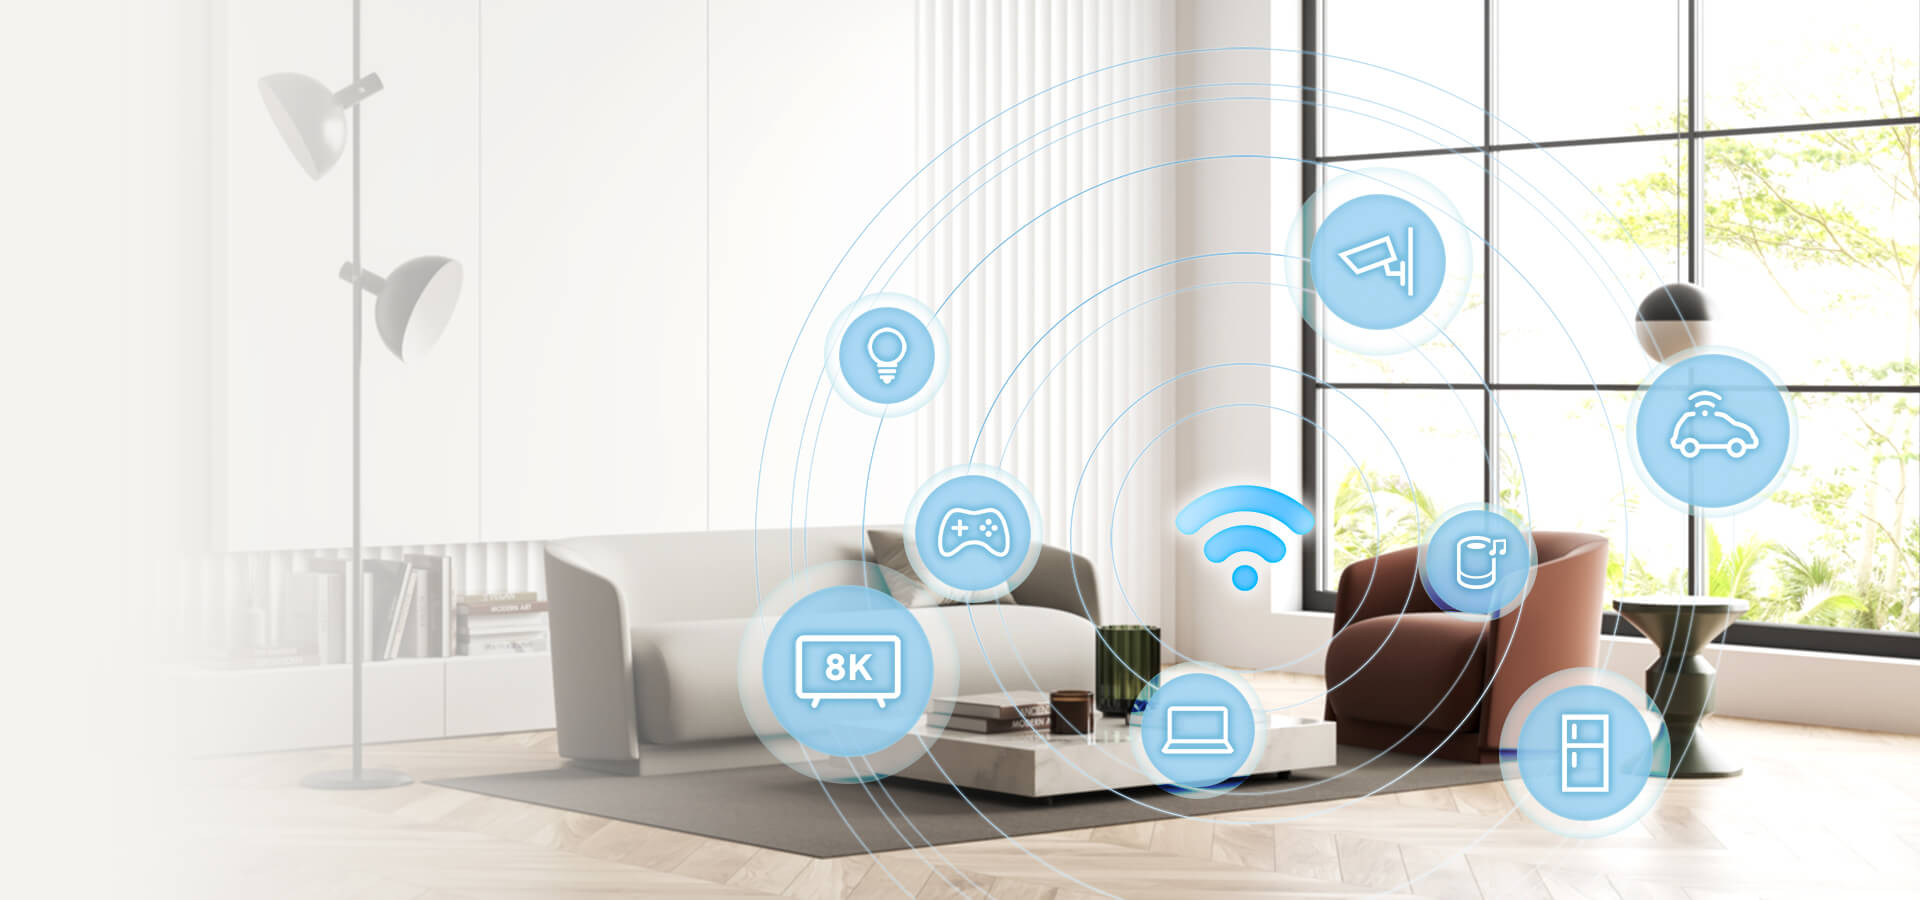 Modern living room with various smart home device icons connected through a central WiFi symbol.